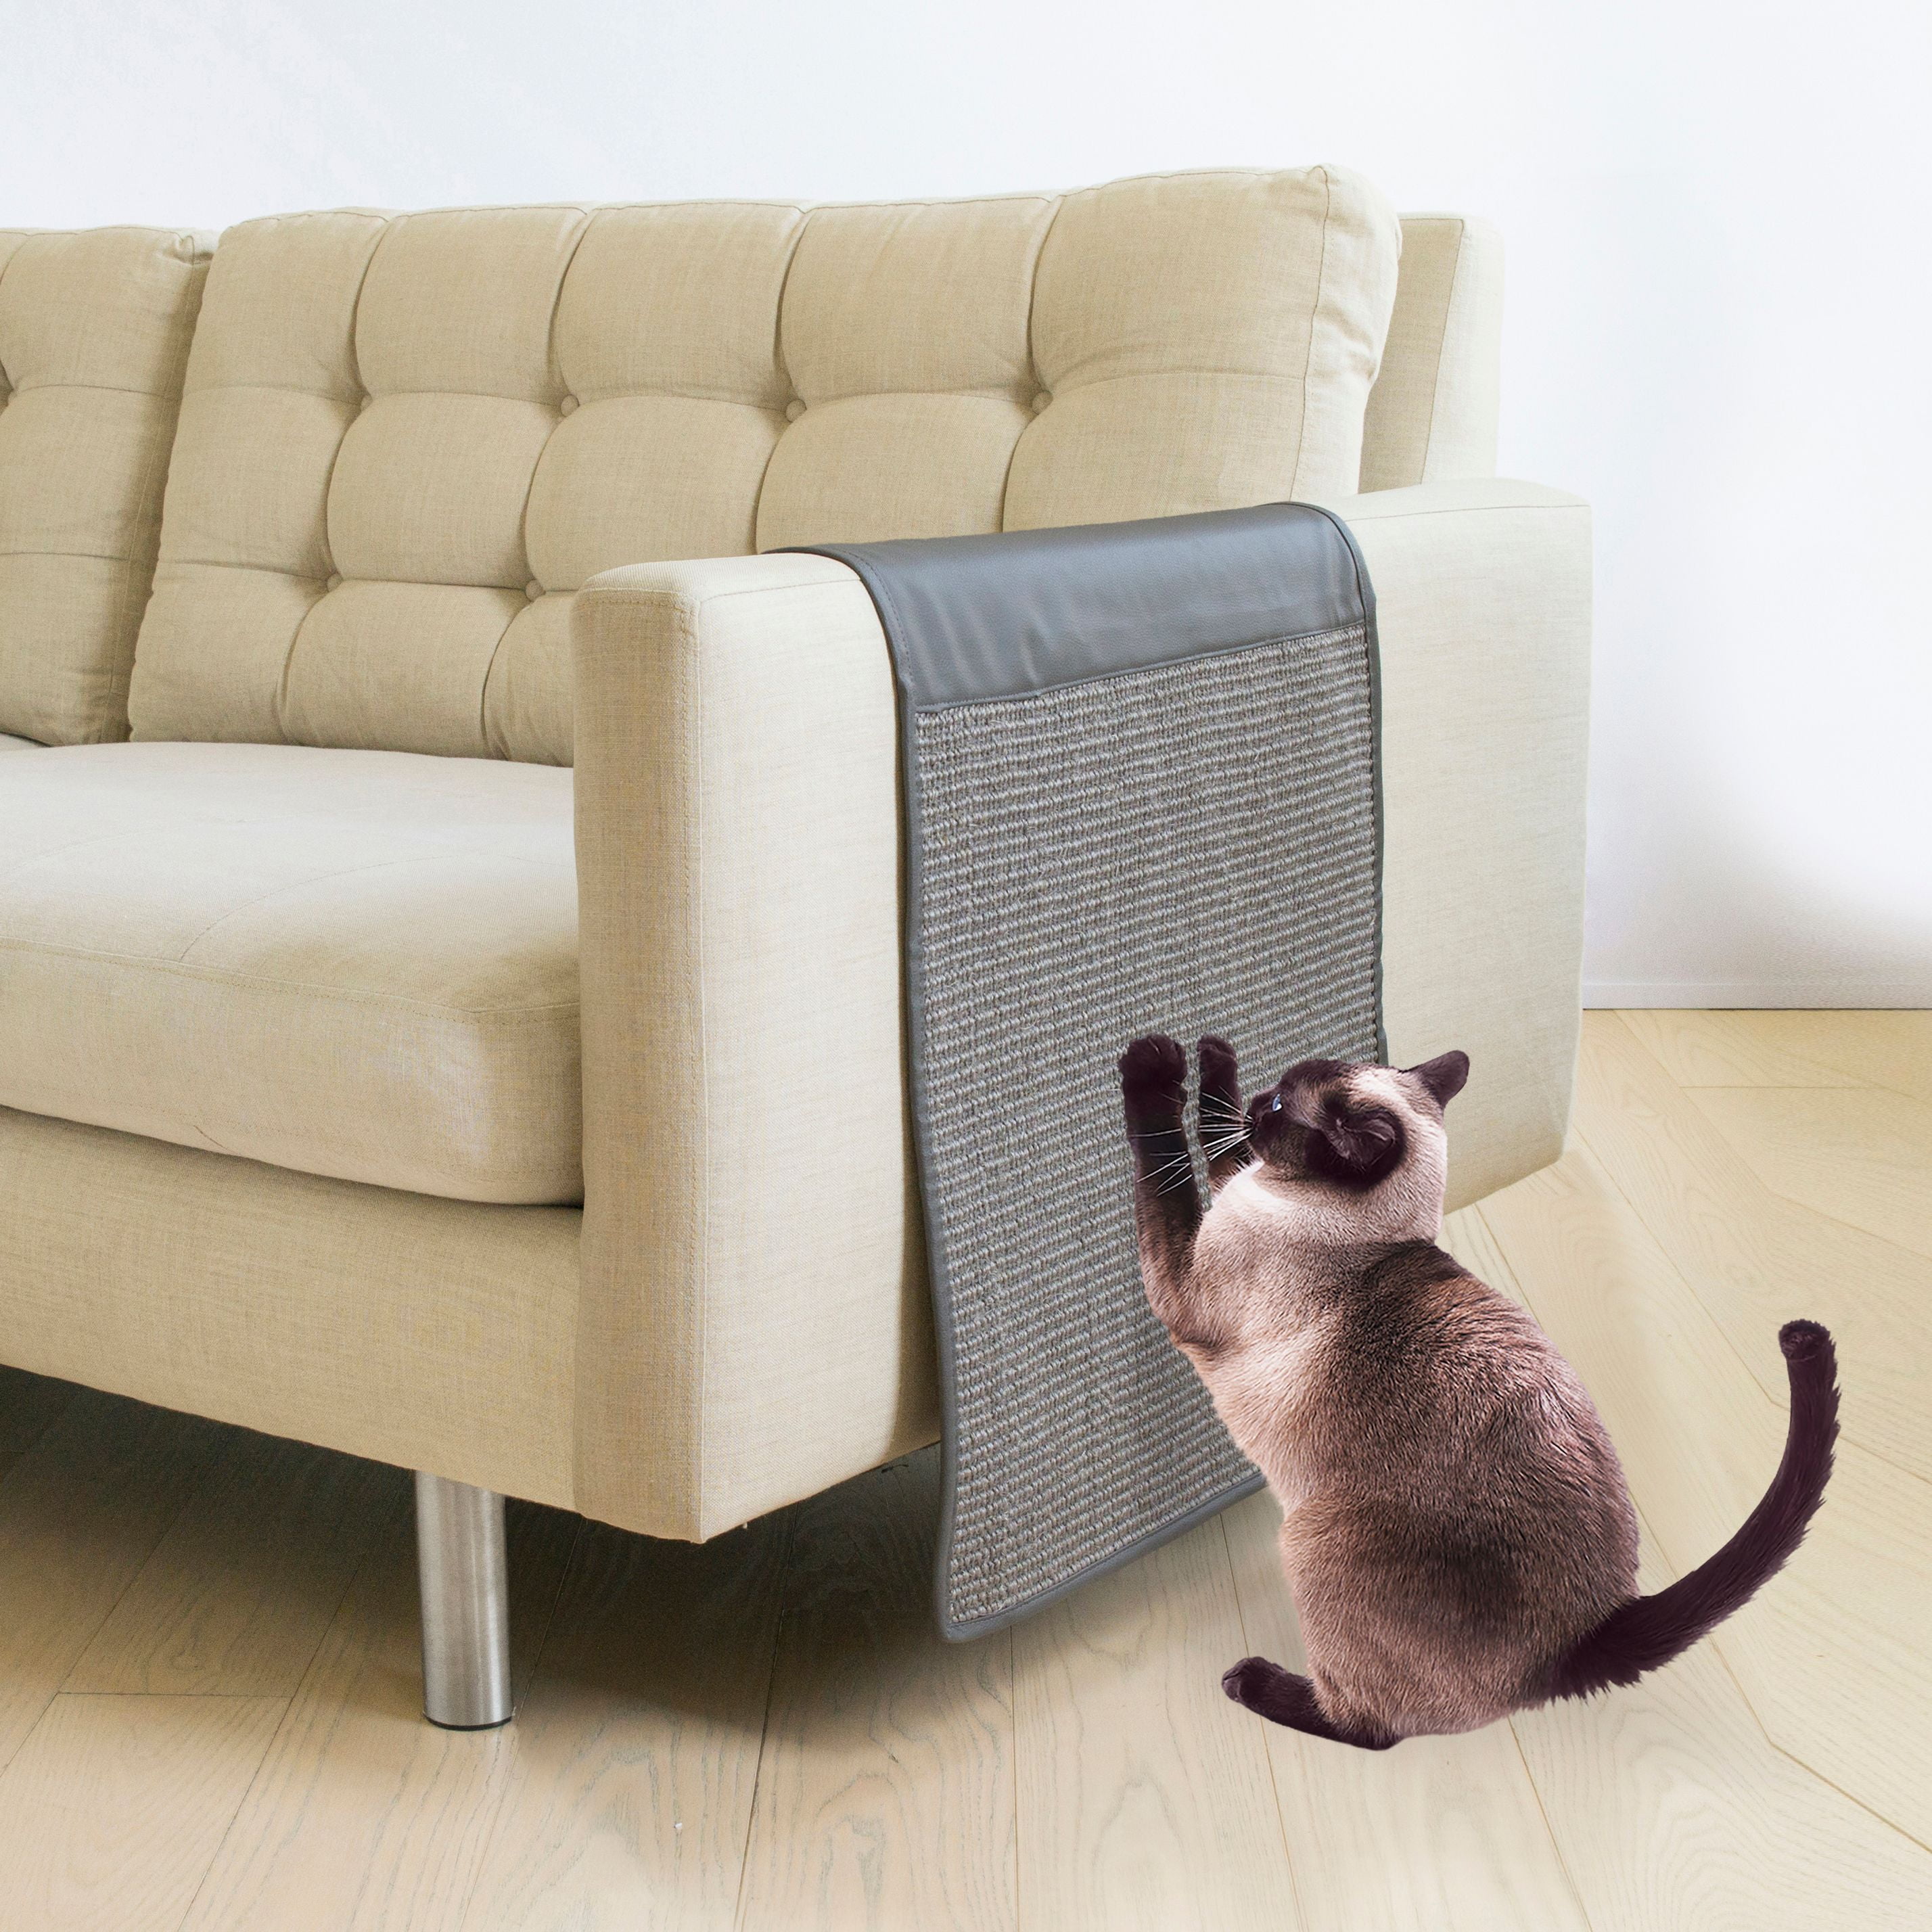 Precious Tails Cat Scratching Sofa, How To Protect Leather Sofa From Cats